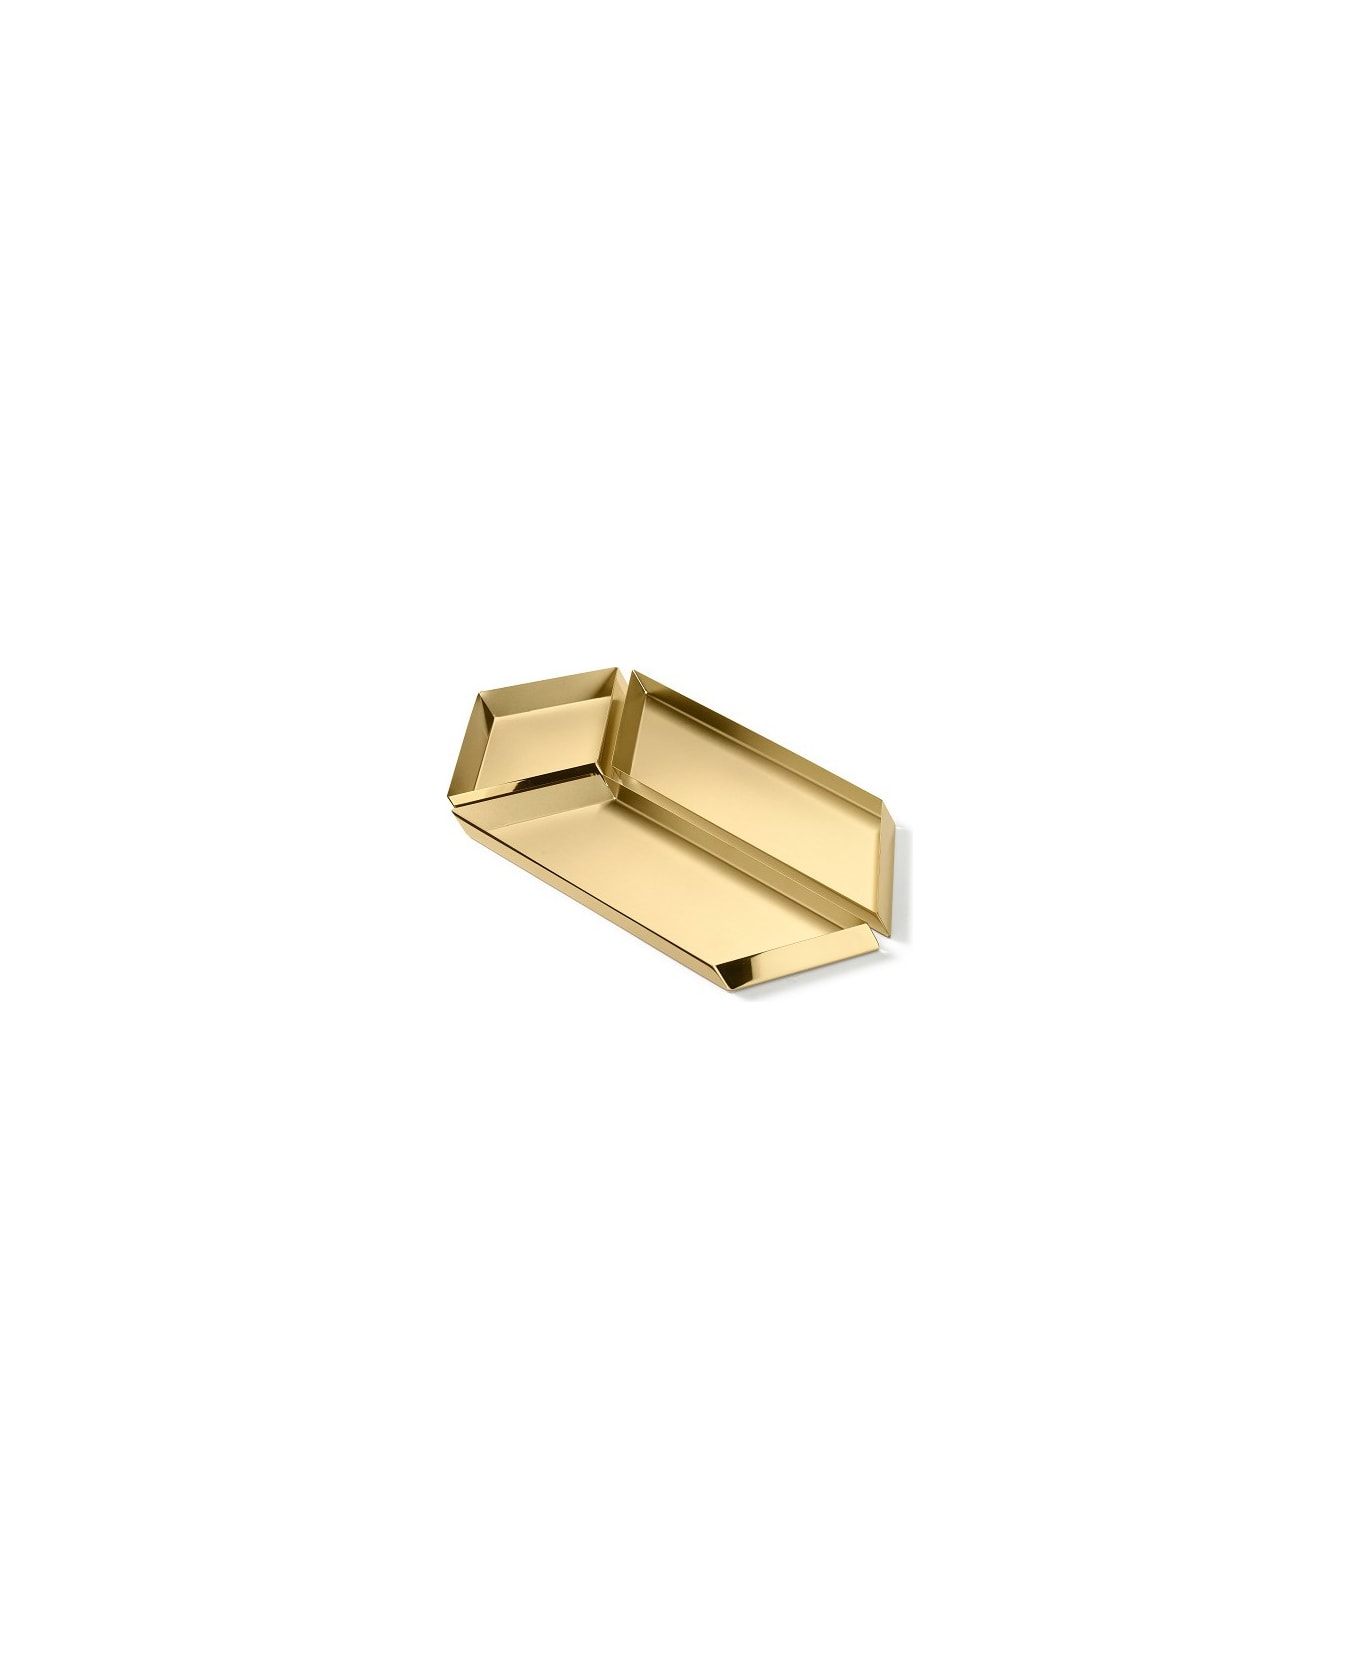 Ghidini 1961 Axonometry - Large Parallelepiped Polished Brass - Polished brass トレー